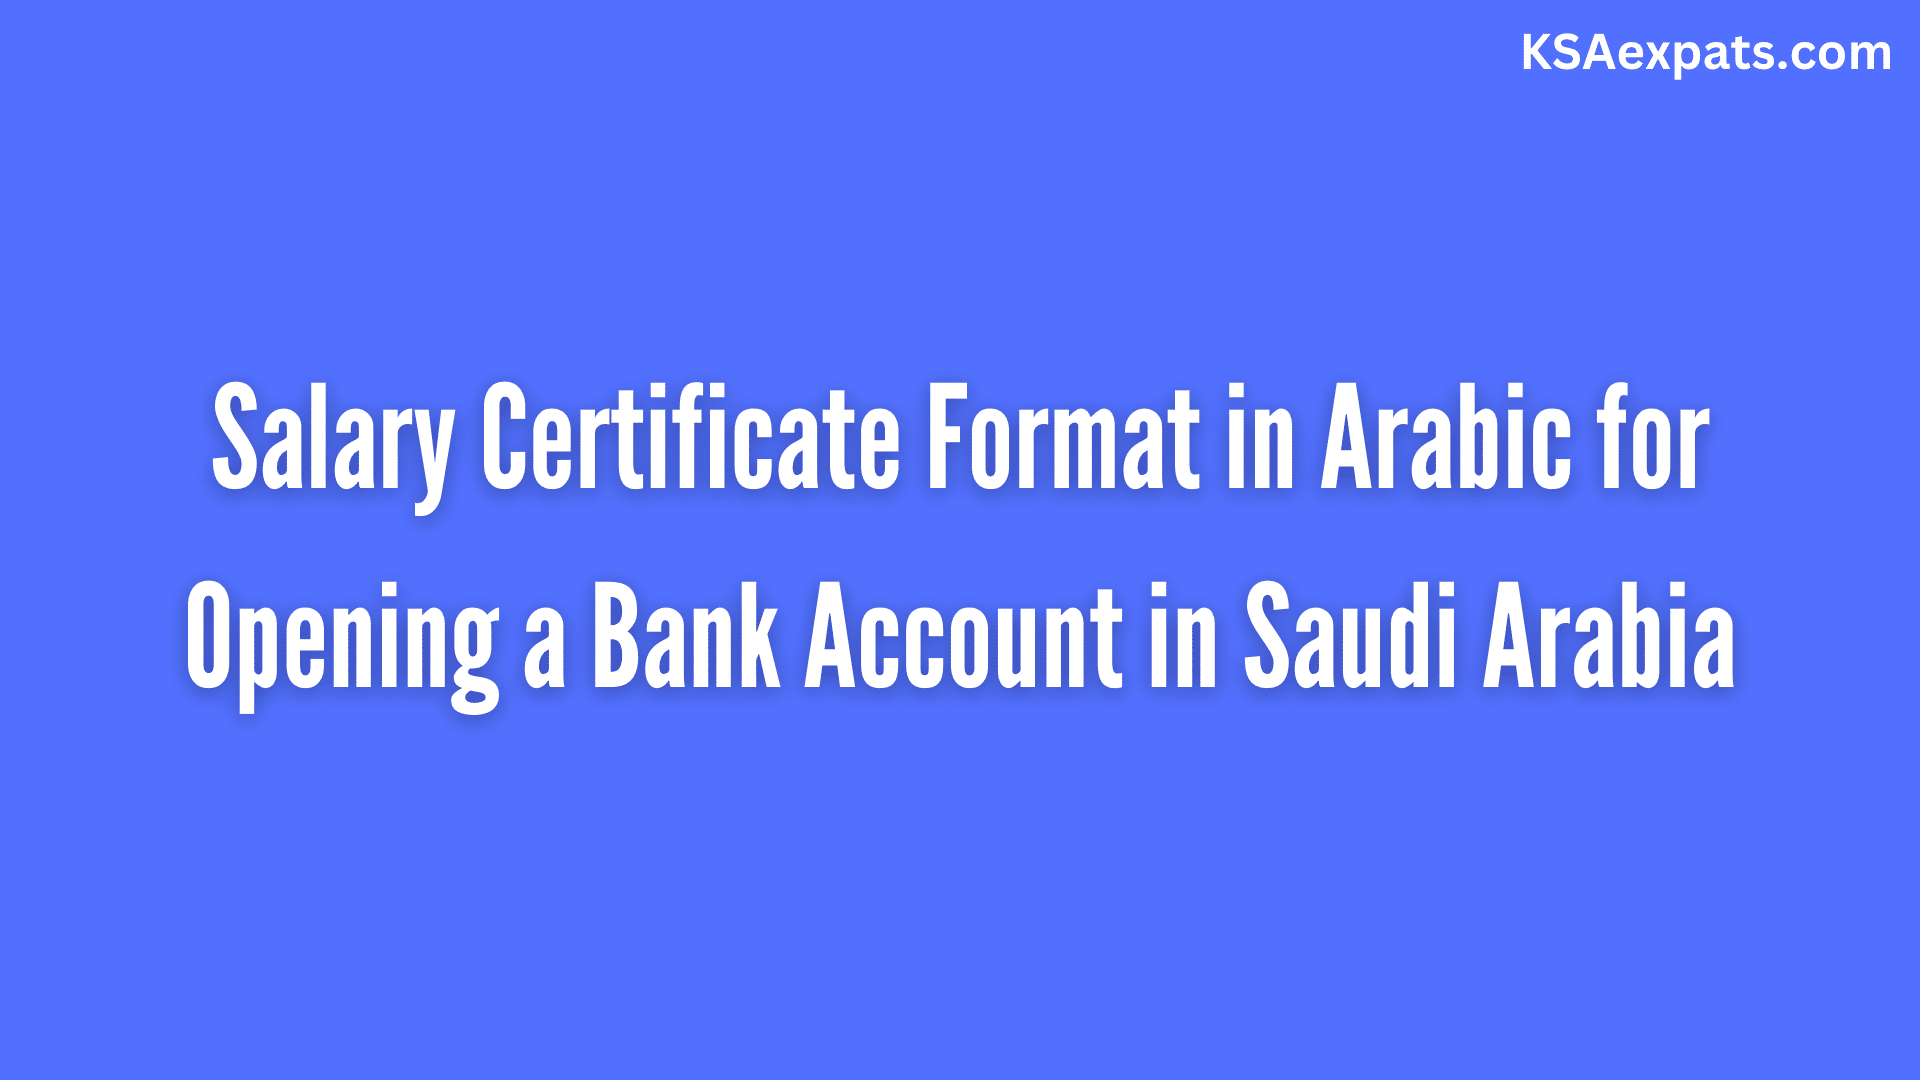 Salary Certificate Format in Arabic for Opening a Bank Account in Saudi Arabia